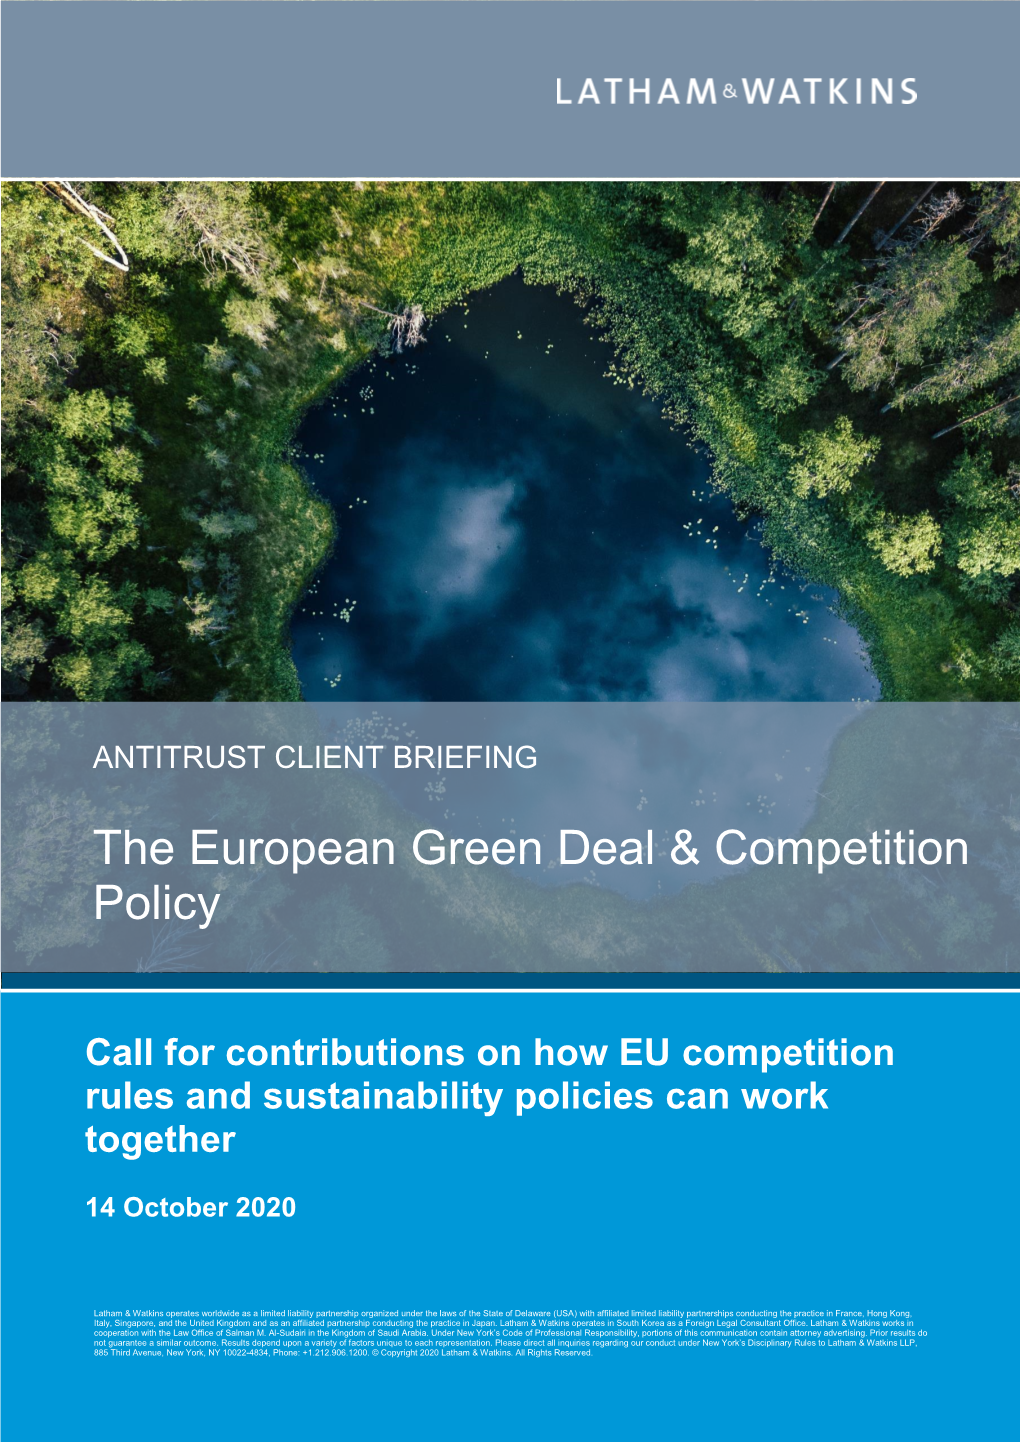 The European Green Deal & Competition Policy